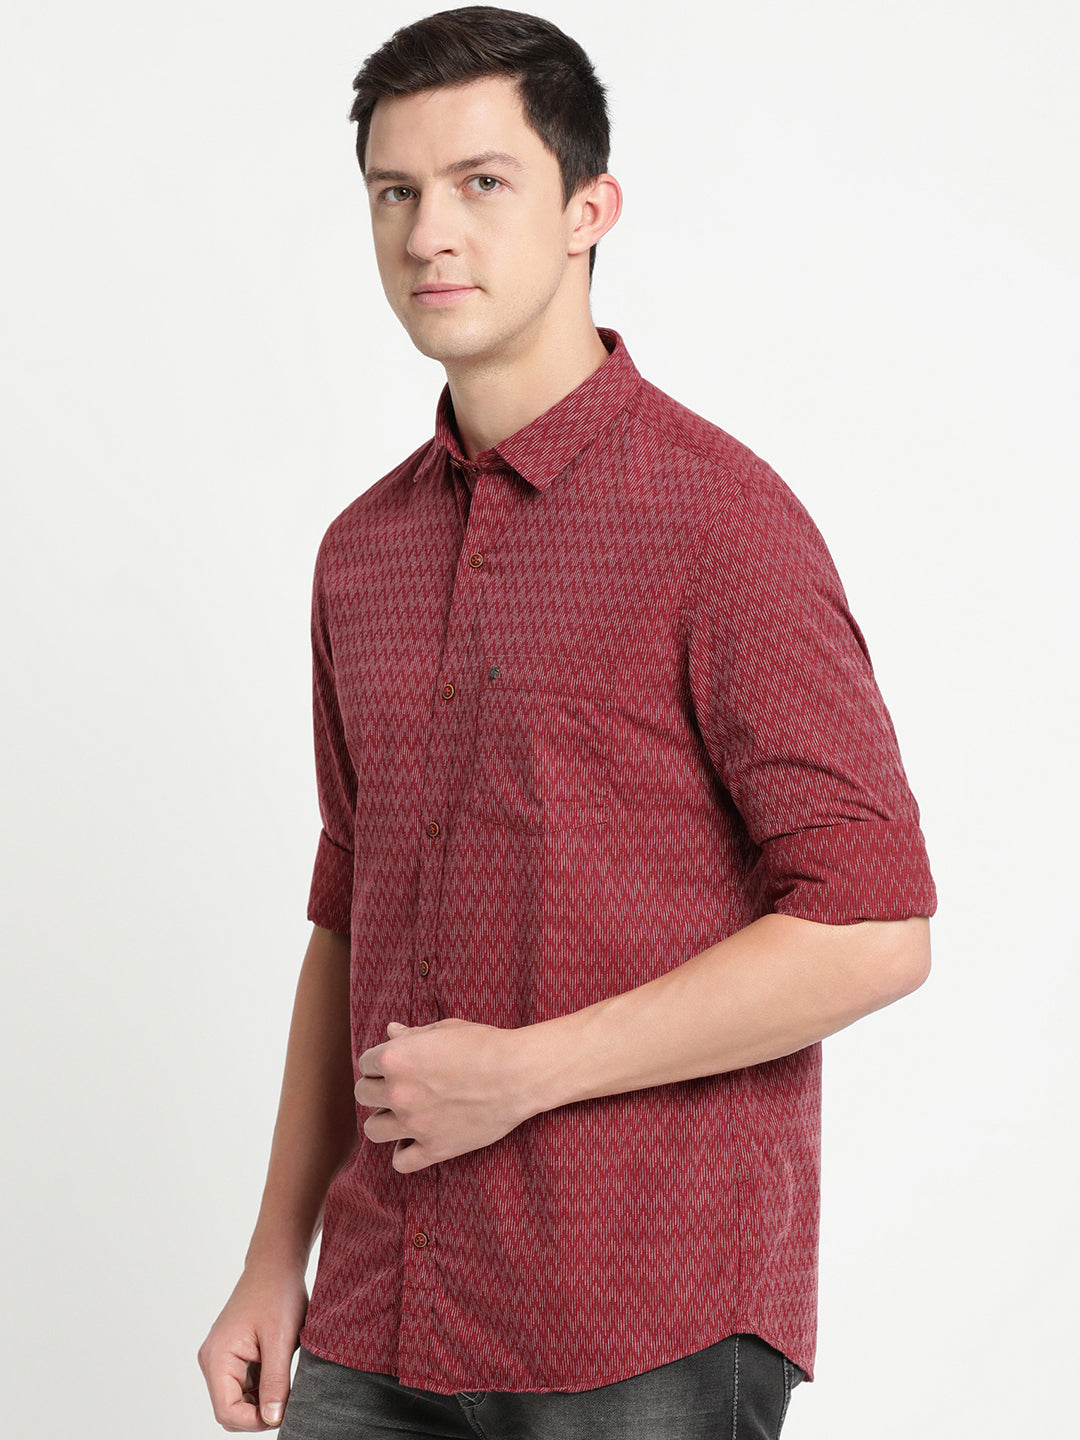 100% Cotton Maroon Dobby Slim Fit Full Sleeve Casual Shirt